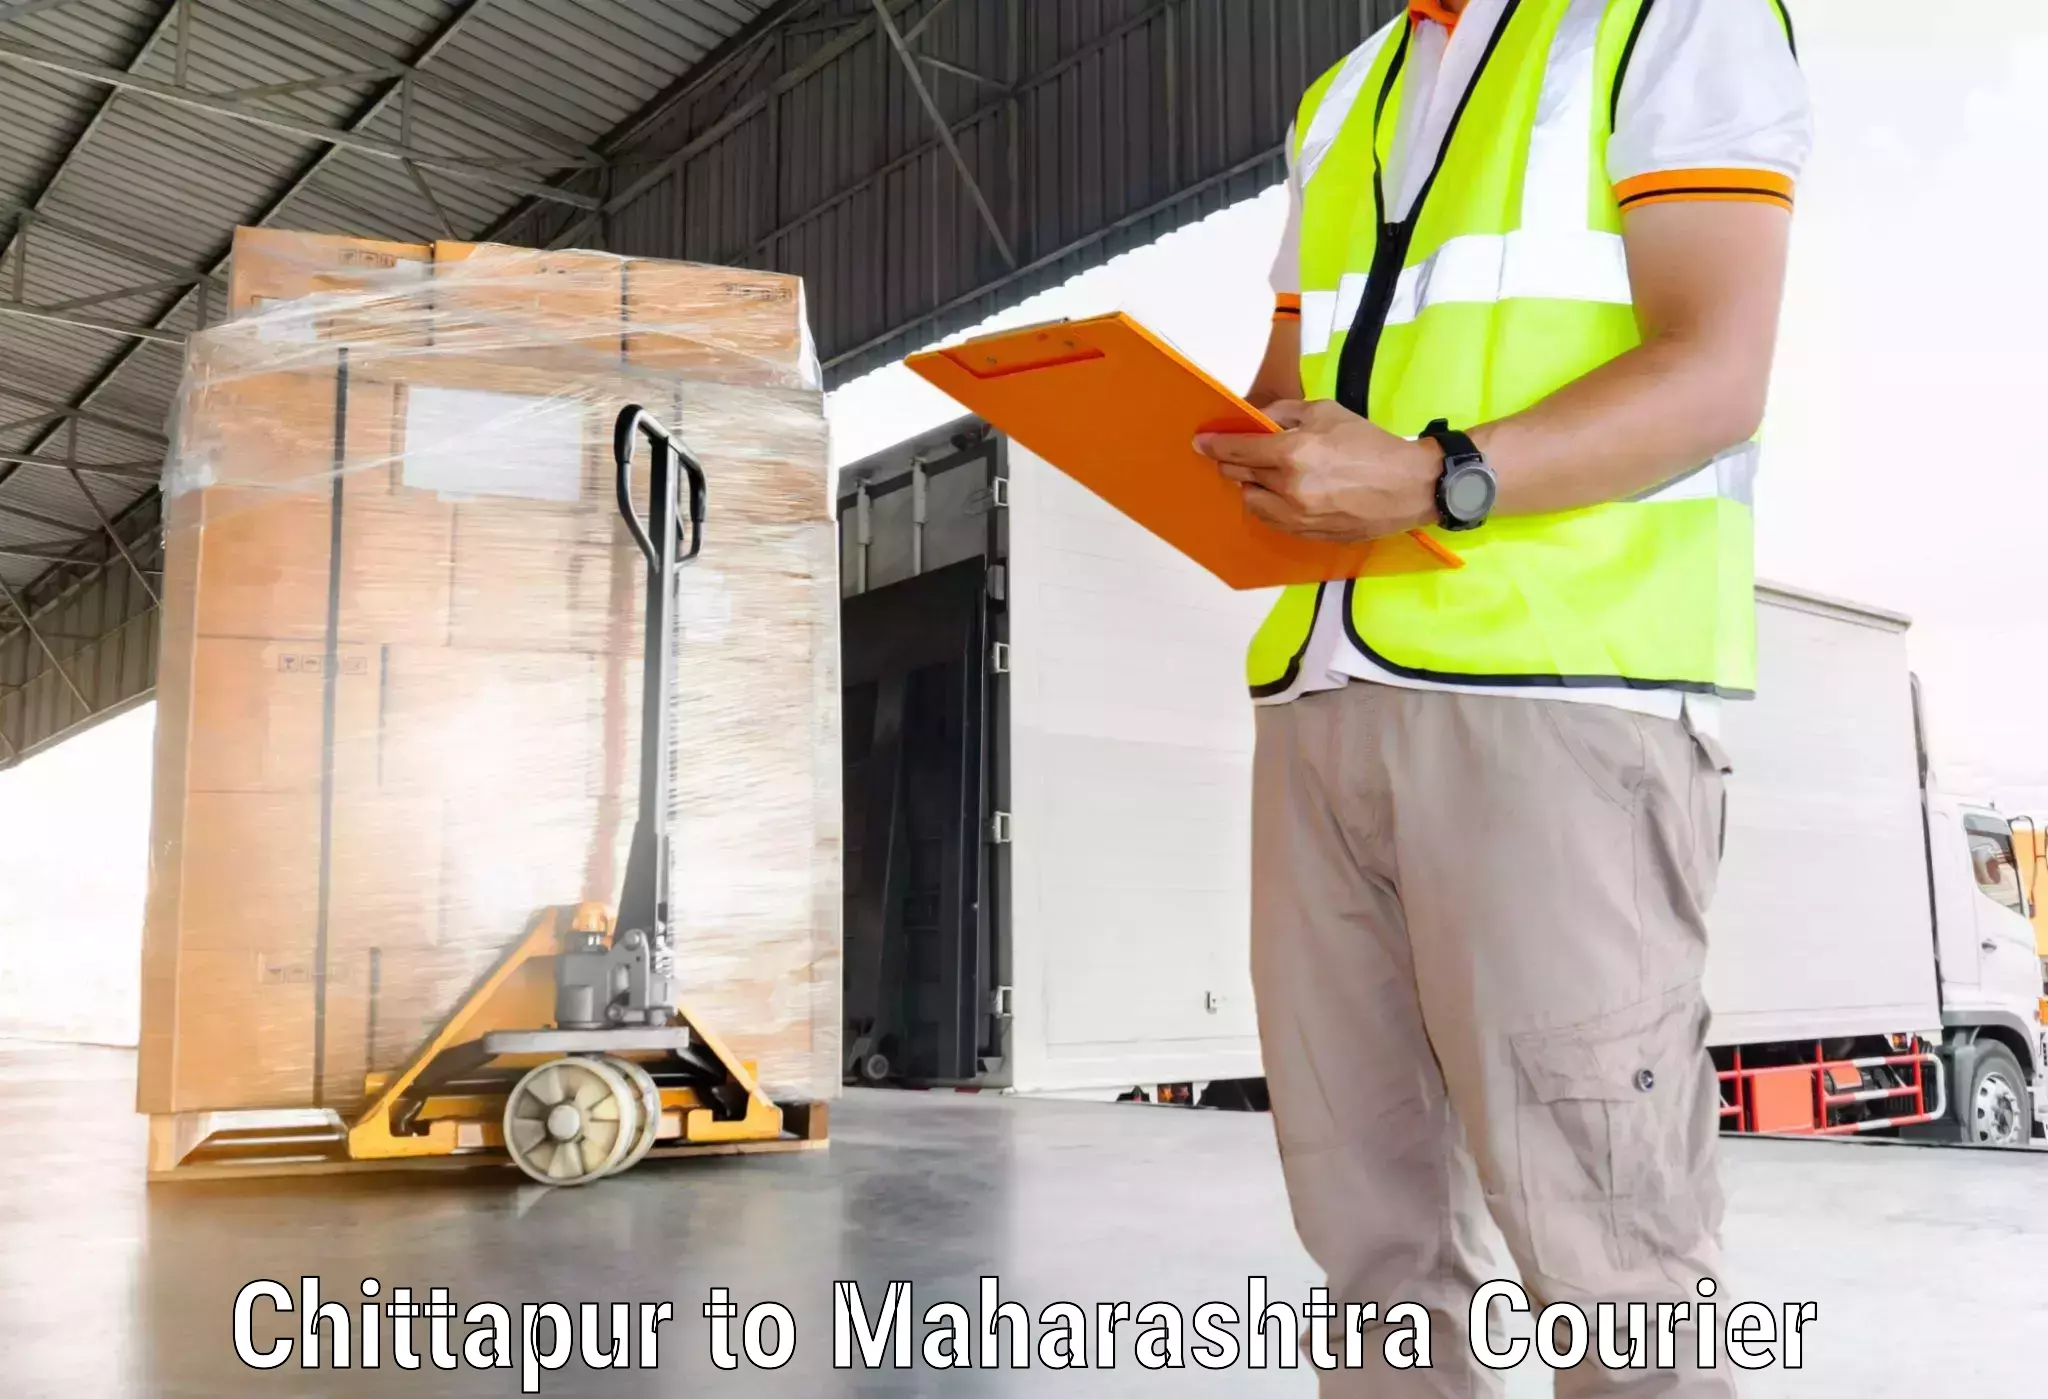 24-hour courier service Chittapur to Sillod